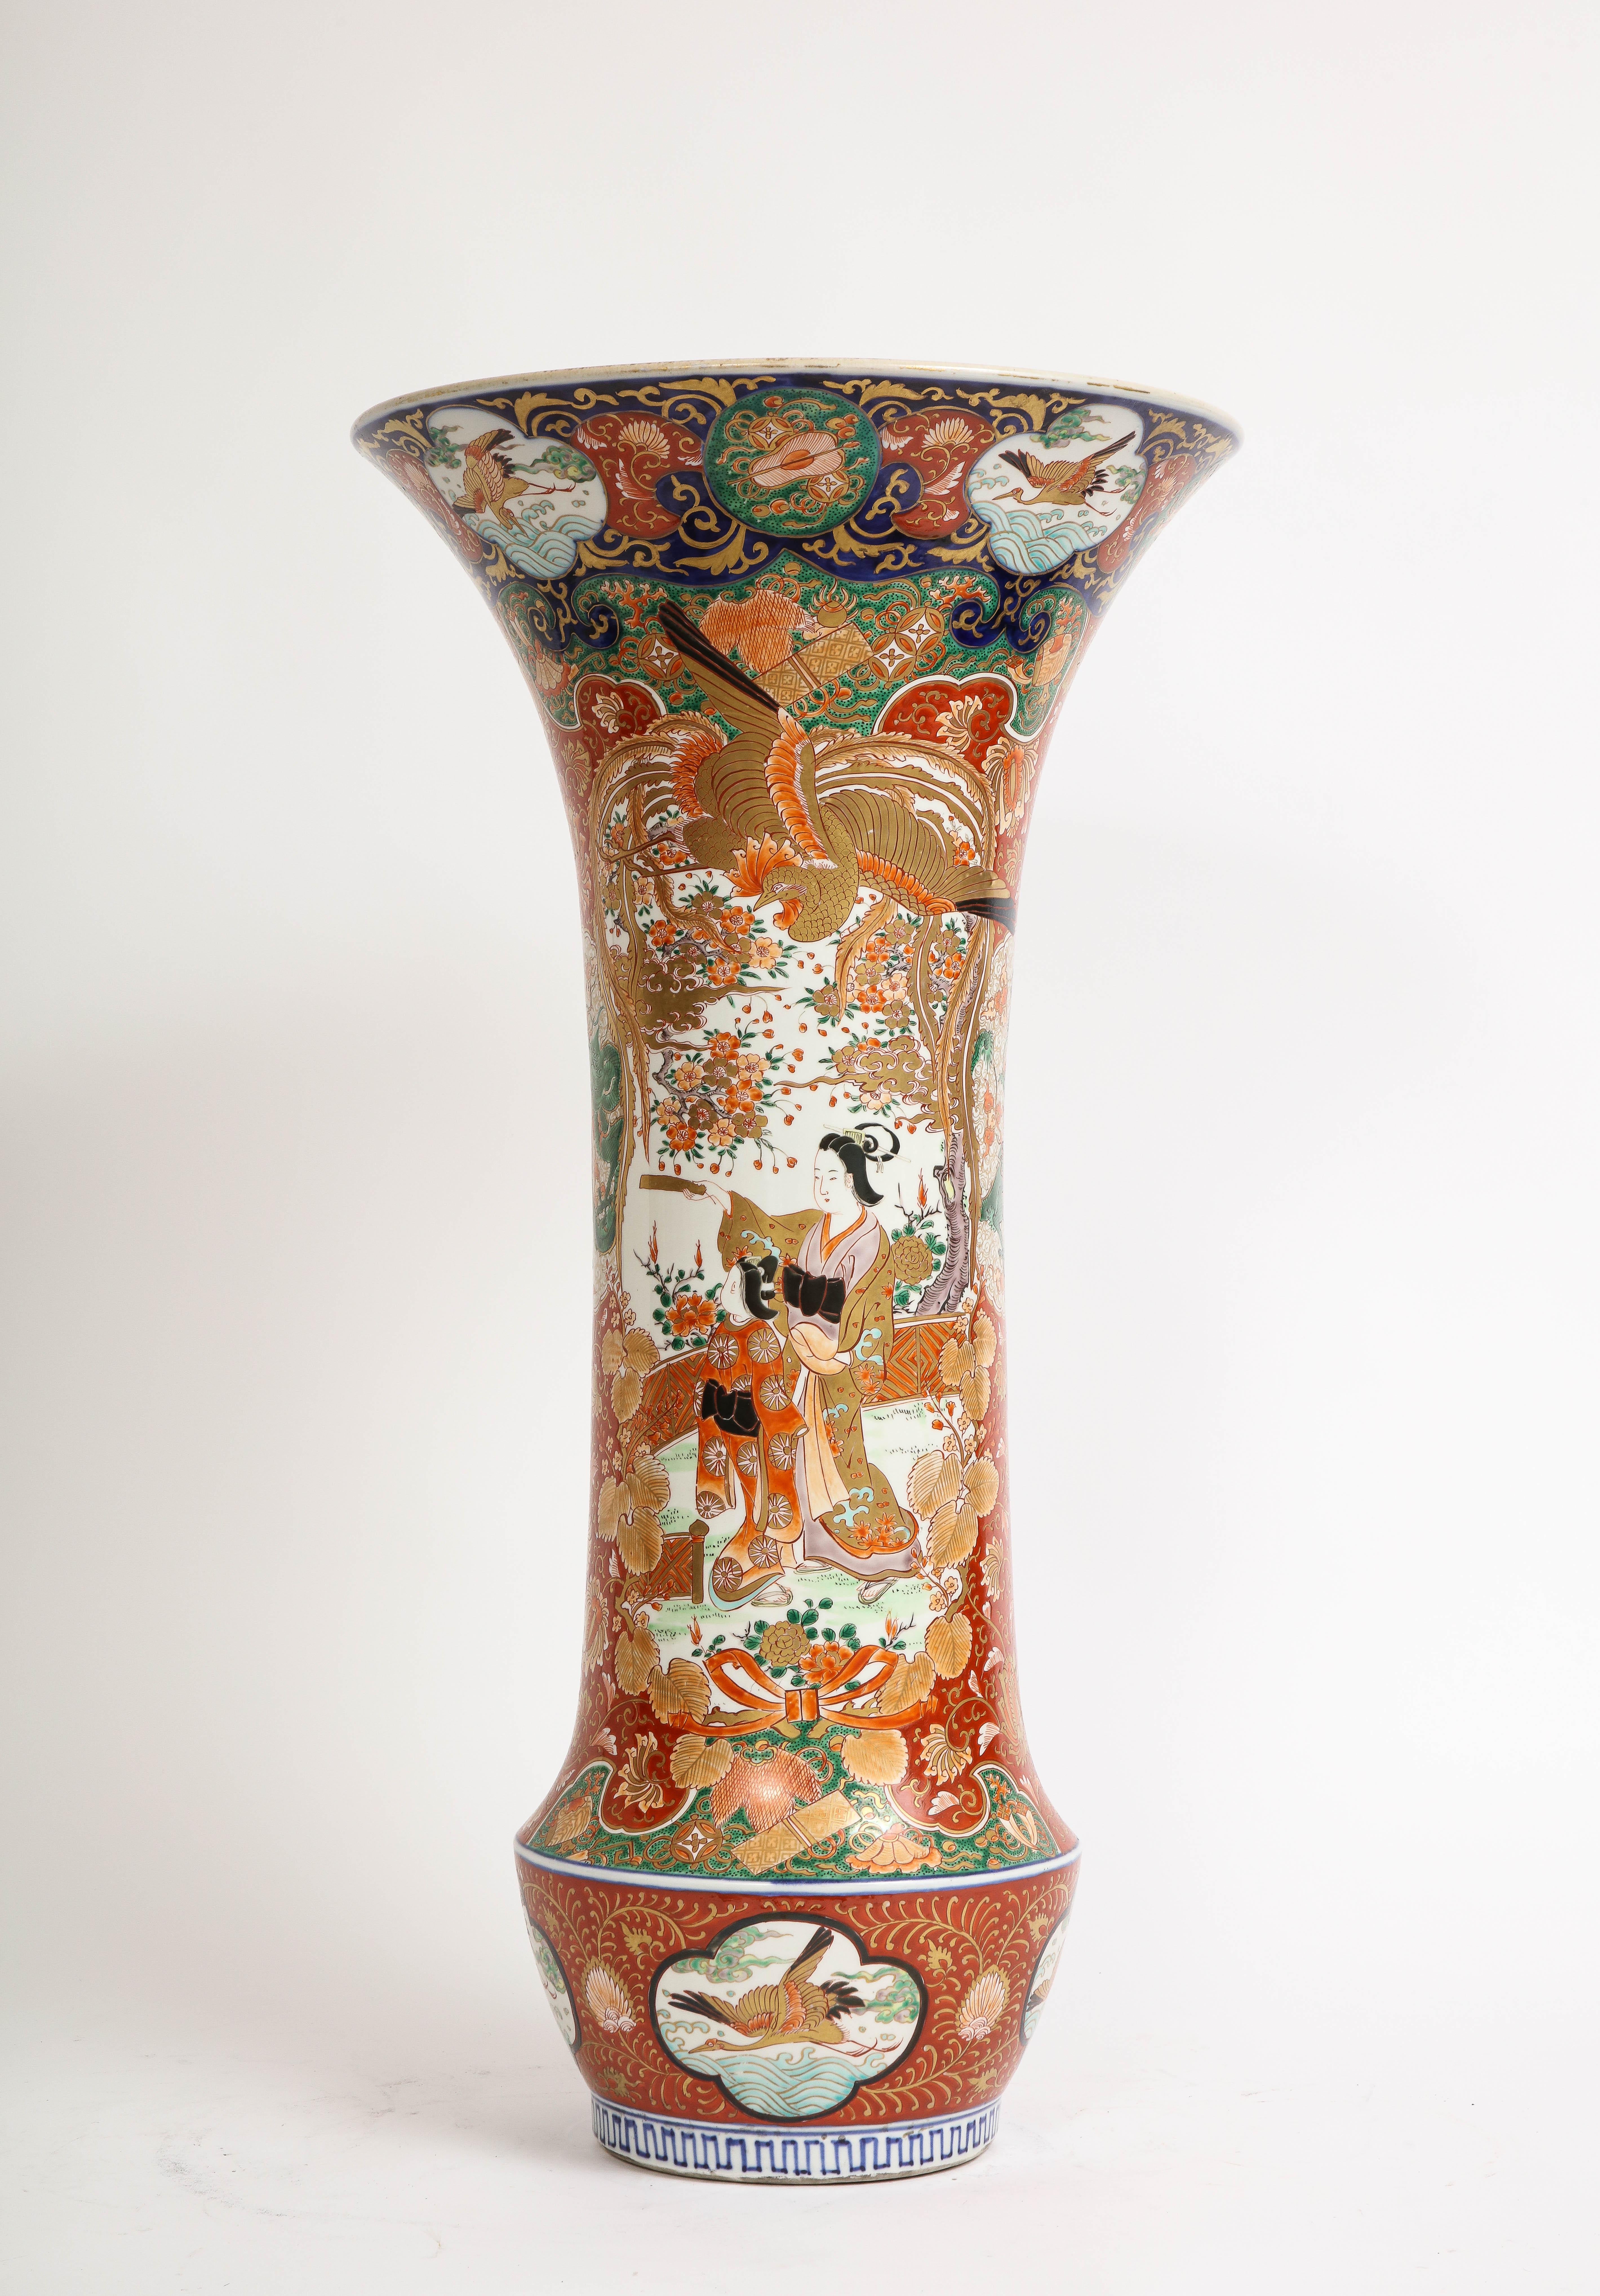  Palace Size Meiji Period Japanese Kutani Porcelain Trumpet Shape Vase, 1880

This exceptional Japanese Kutani vase, boasts a palace-size trumpet shape that stands at an impressive 31 inches in height. Crafted around the year 1880, during the